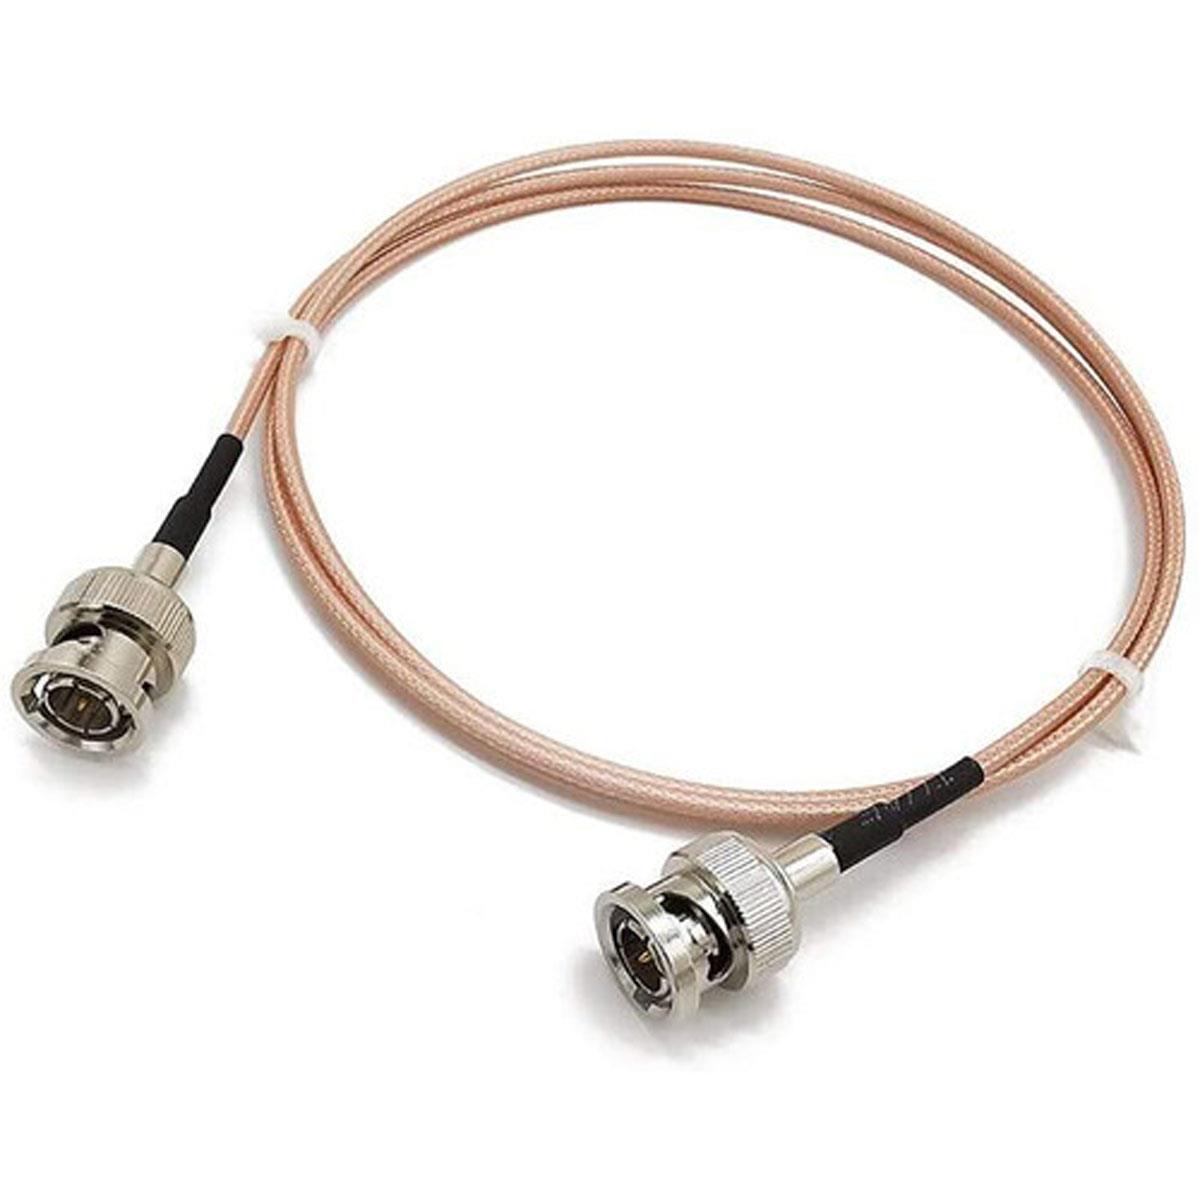 Image of AndyCine 3.3' BNC Male to BNC Male SDI Coaxial Cable for Camera Monitor